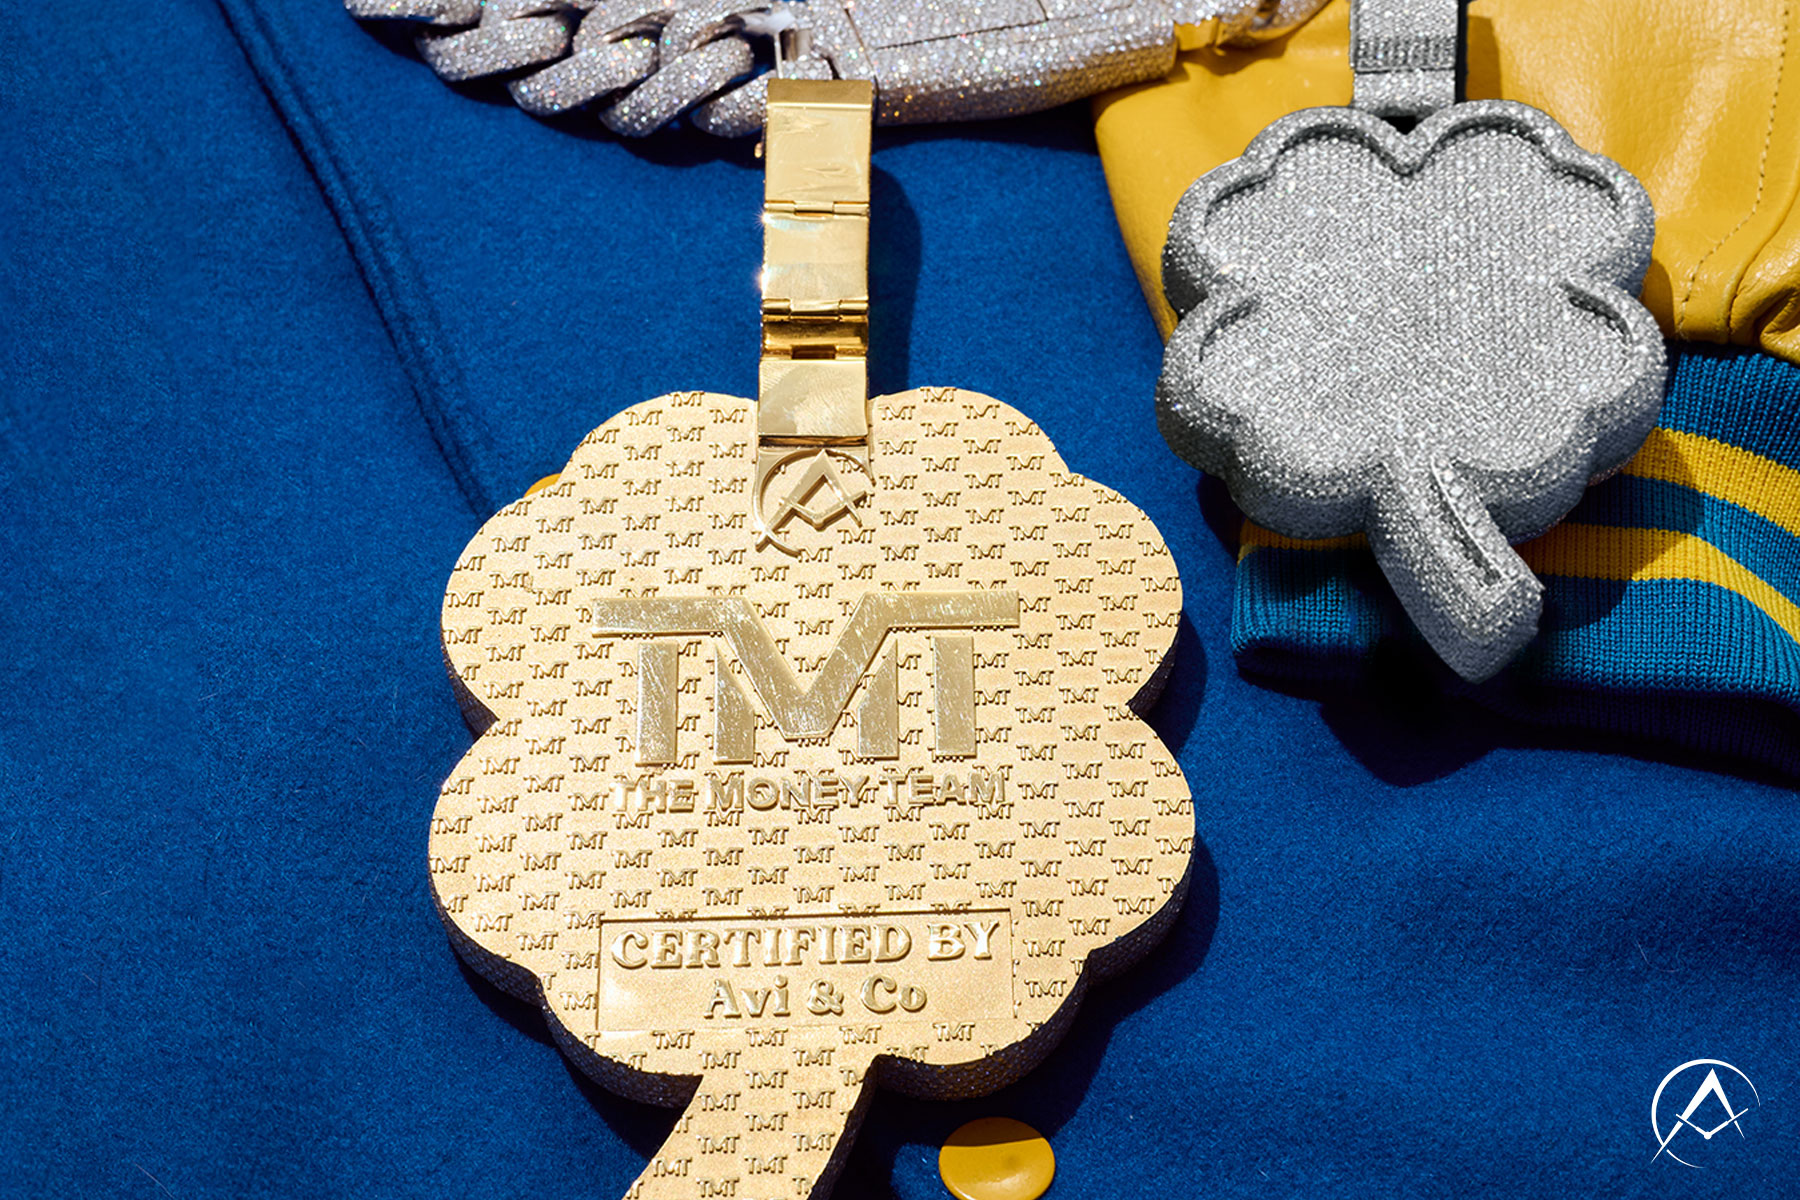 Avi & Co. Creates Custom Jewelry for Legendary Celebrities such as this Four-Leaf Clover Diamond-Pave Chain for Floyd Mayweather. The Money Team, Certified by Avi & Co. is Engraved on the Back.